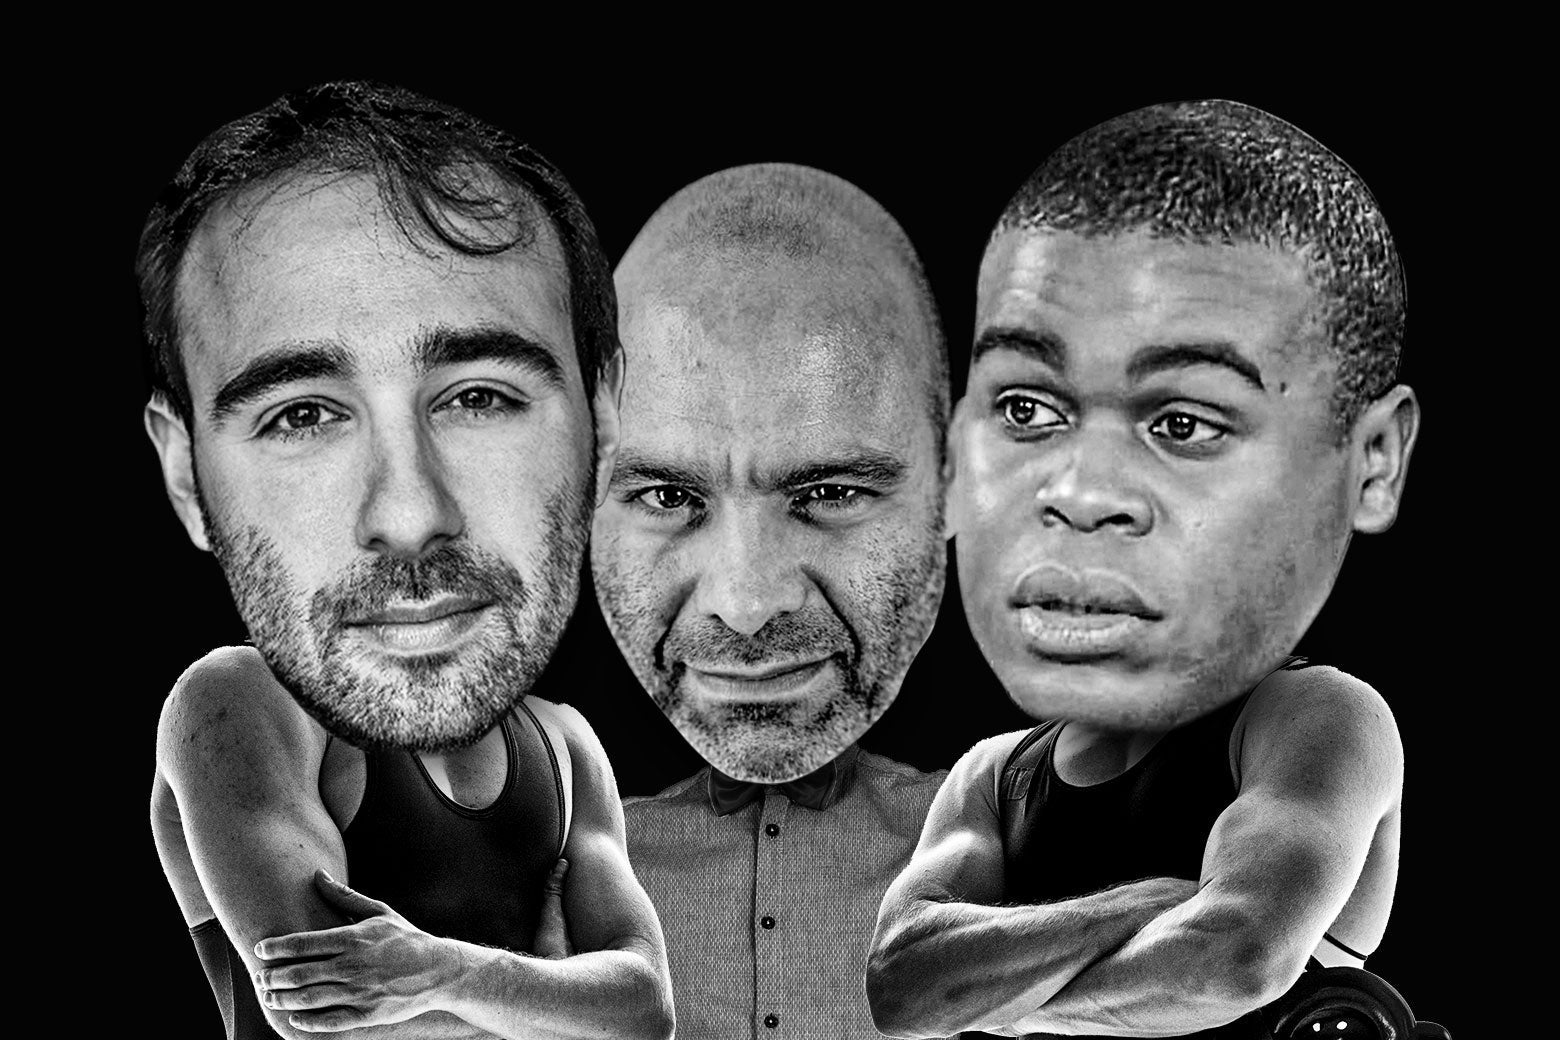 From left to right: Yascha Mounk, Mike Pesca, and Osita Nwanevu, their heads photoshopped onto muscular people who appear ready to fight, and for Pesca, on a referee.